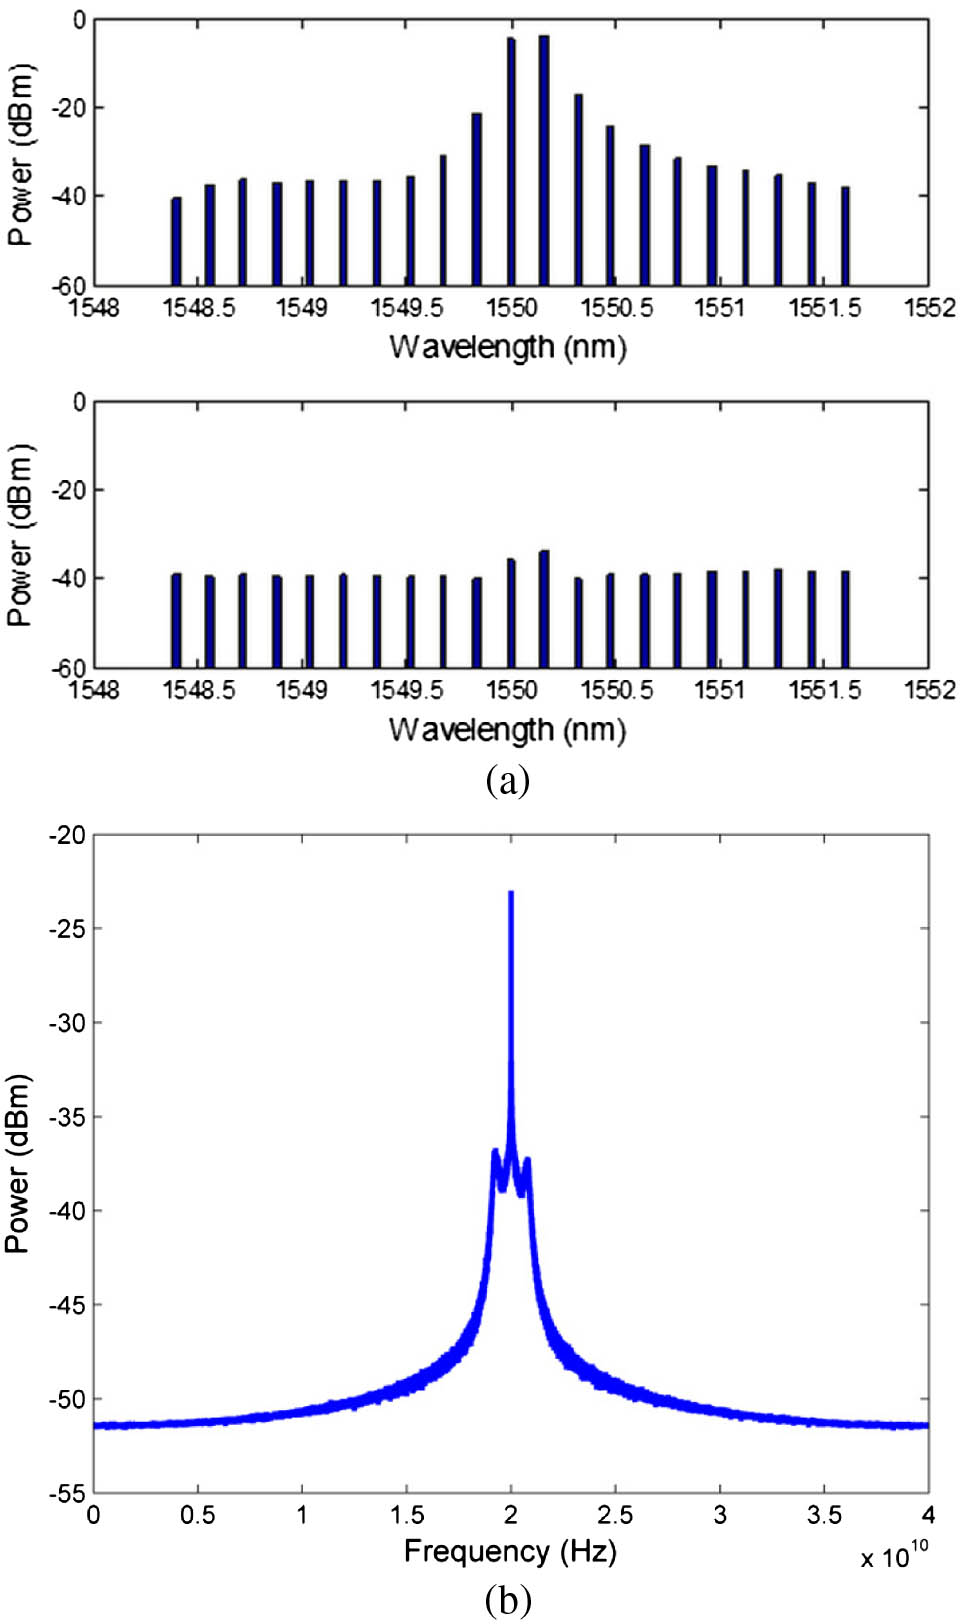 Spectra of (a) dual DFB injection-locked SRL modes in the CCW and CW directions, and (b) generated RF signal by beating the two lasing modes in the CCW direction. Pdfb1,2=0.23 dBm, Psrl−fr=−20.3 dBm, and Δω=0.